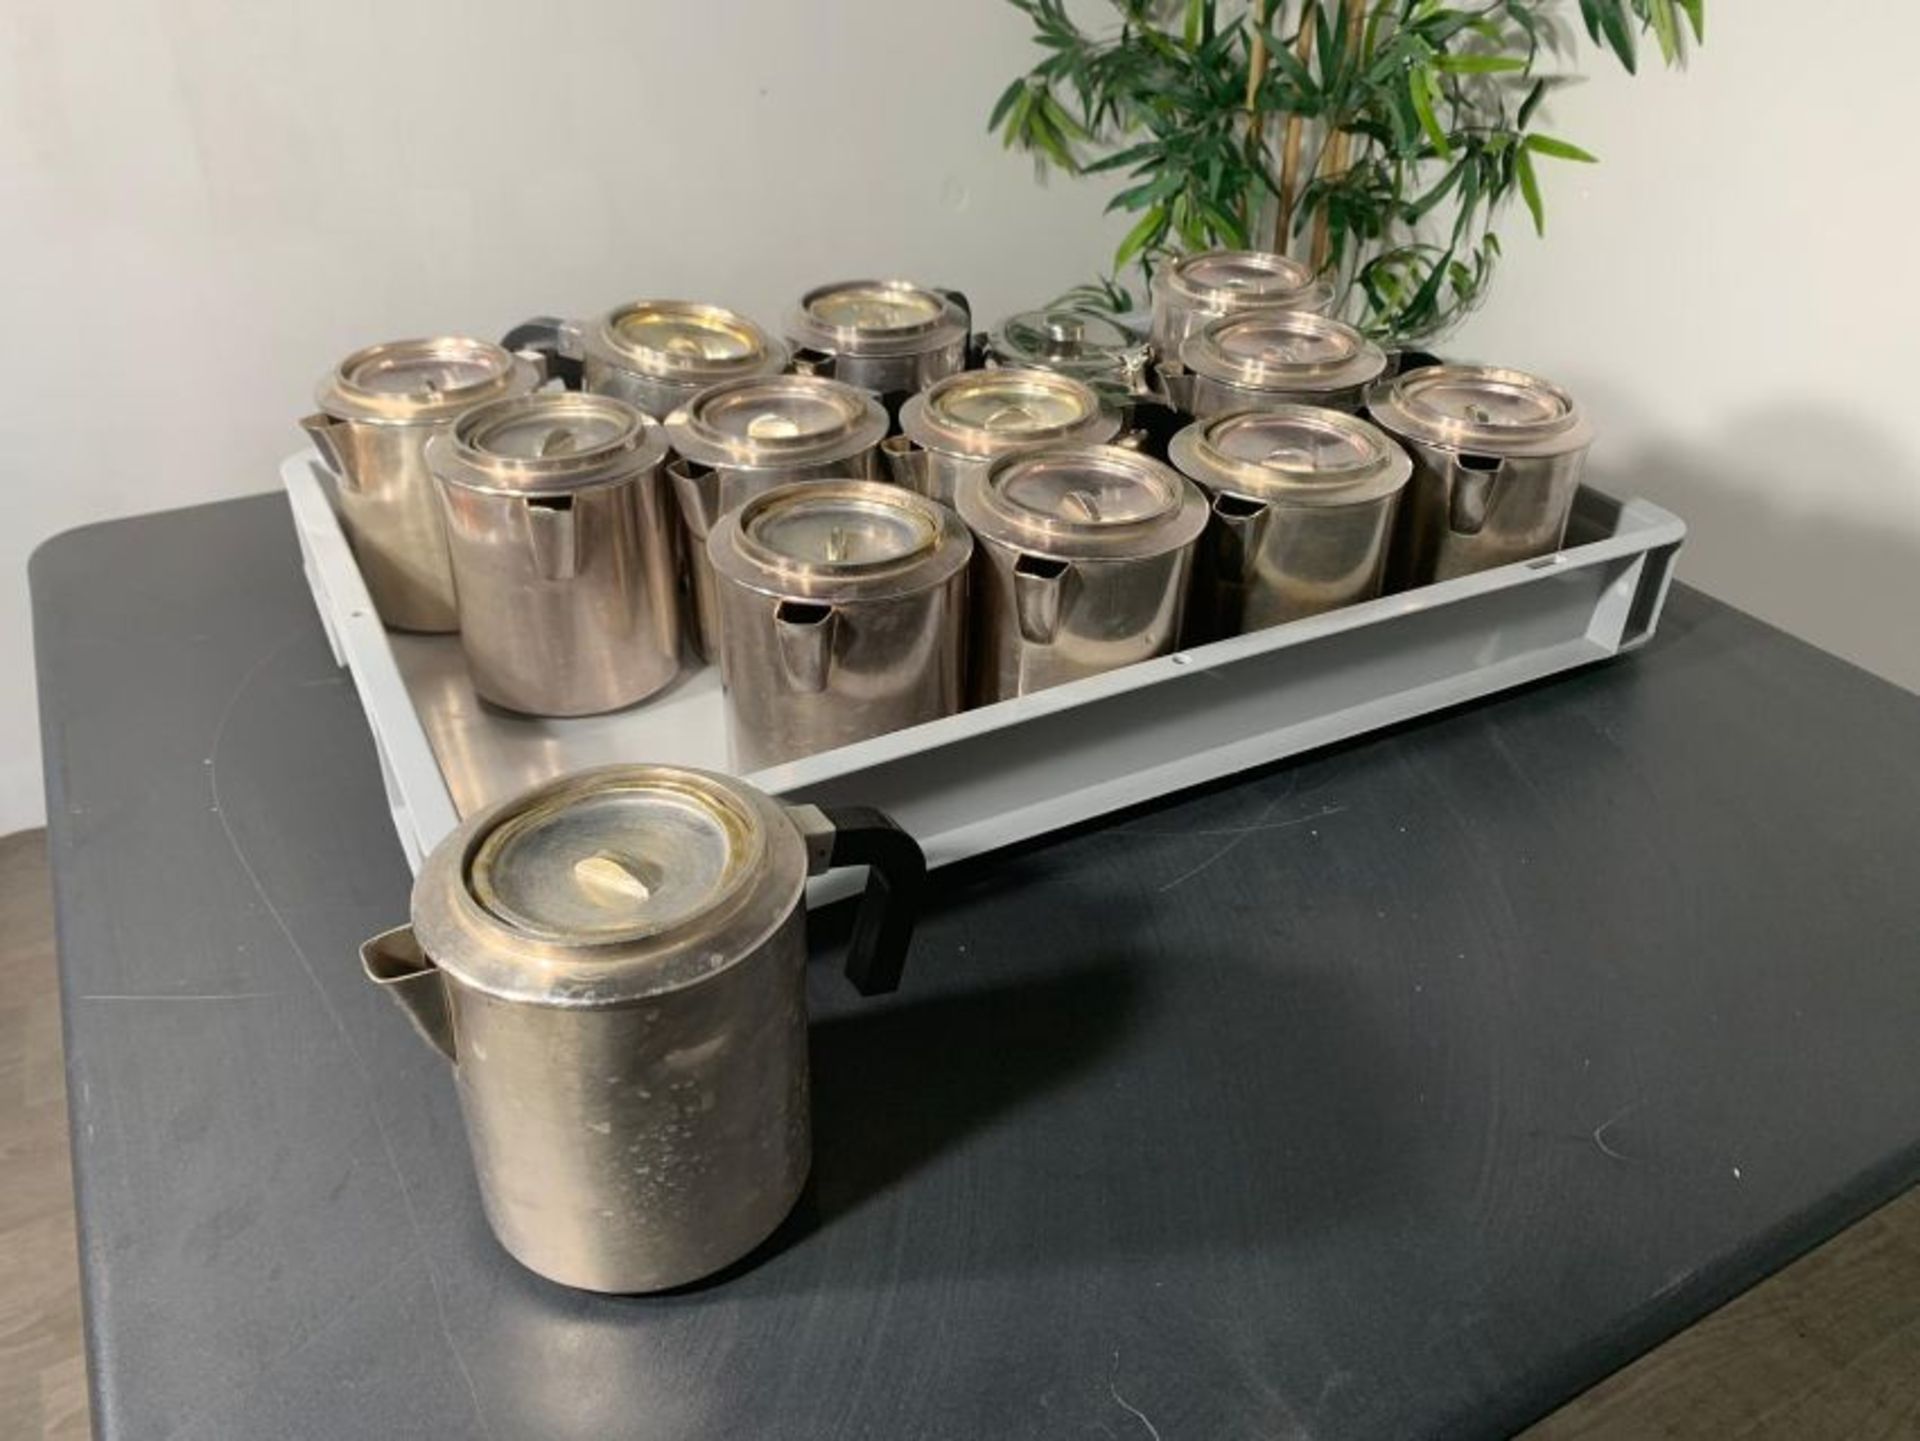 Stainless Steel Teapots Exluding Lids x 8. - Image 2 of 5